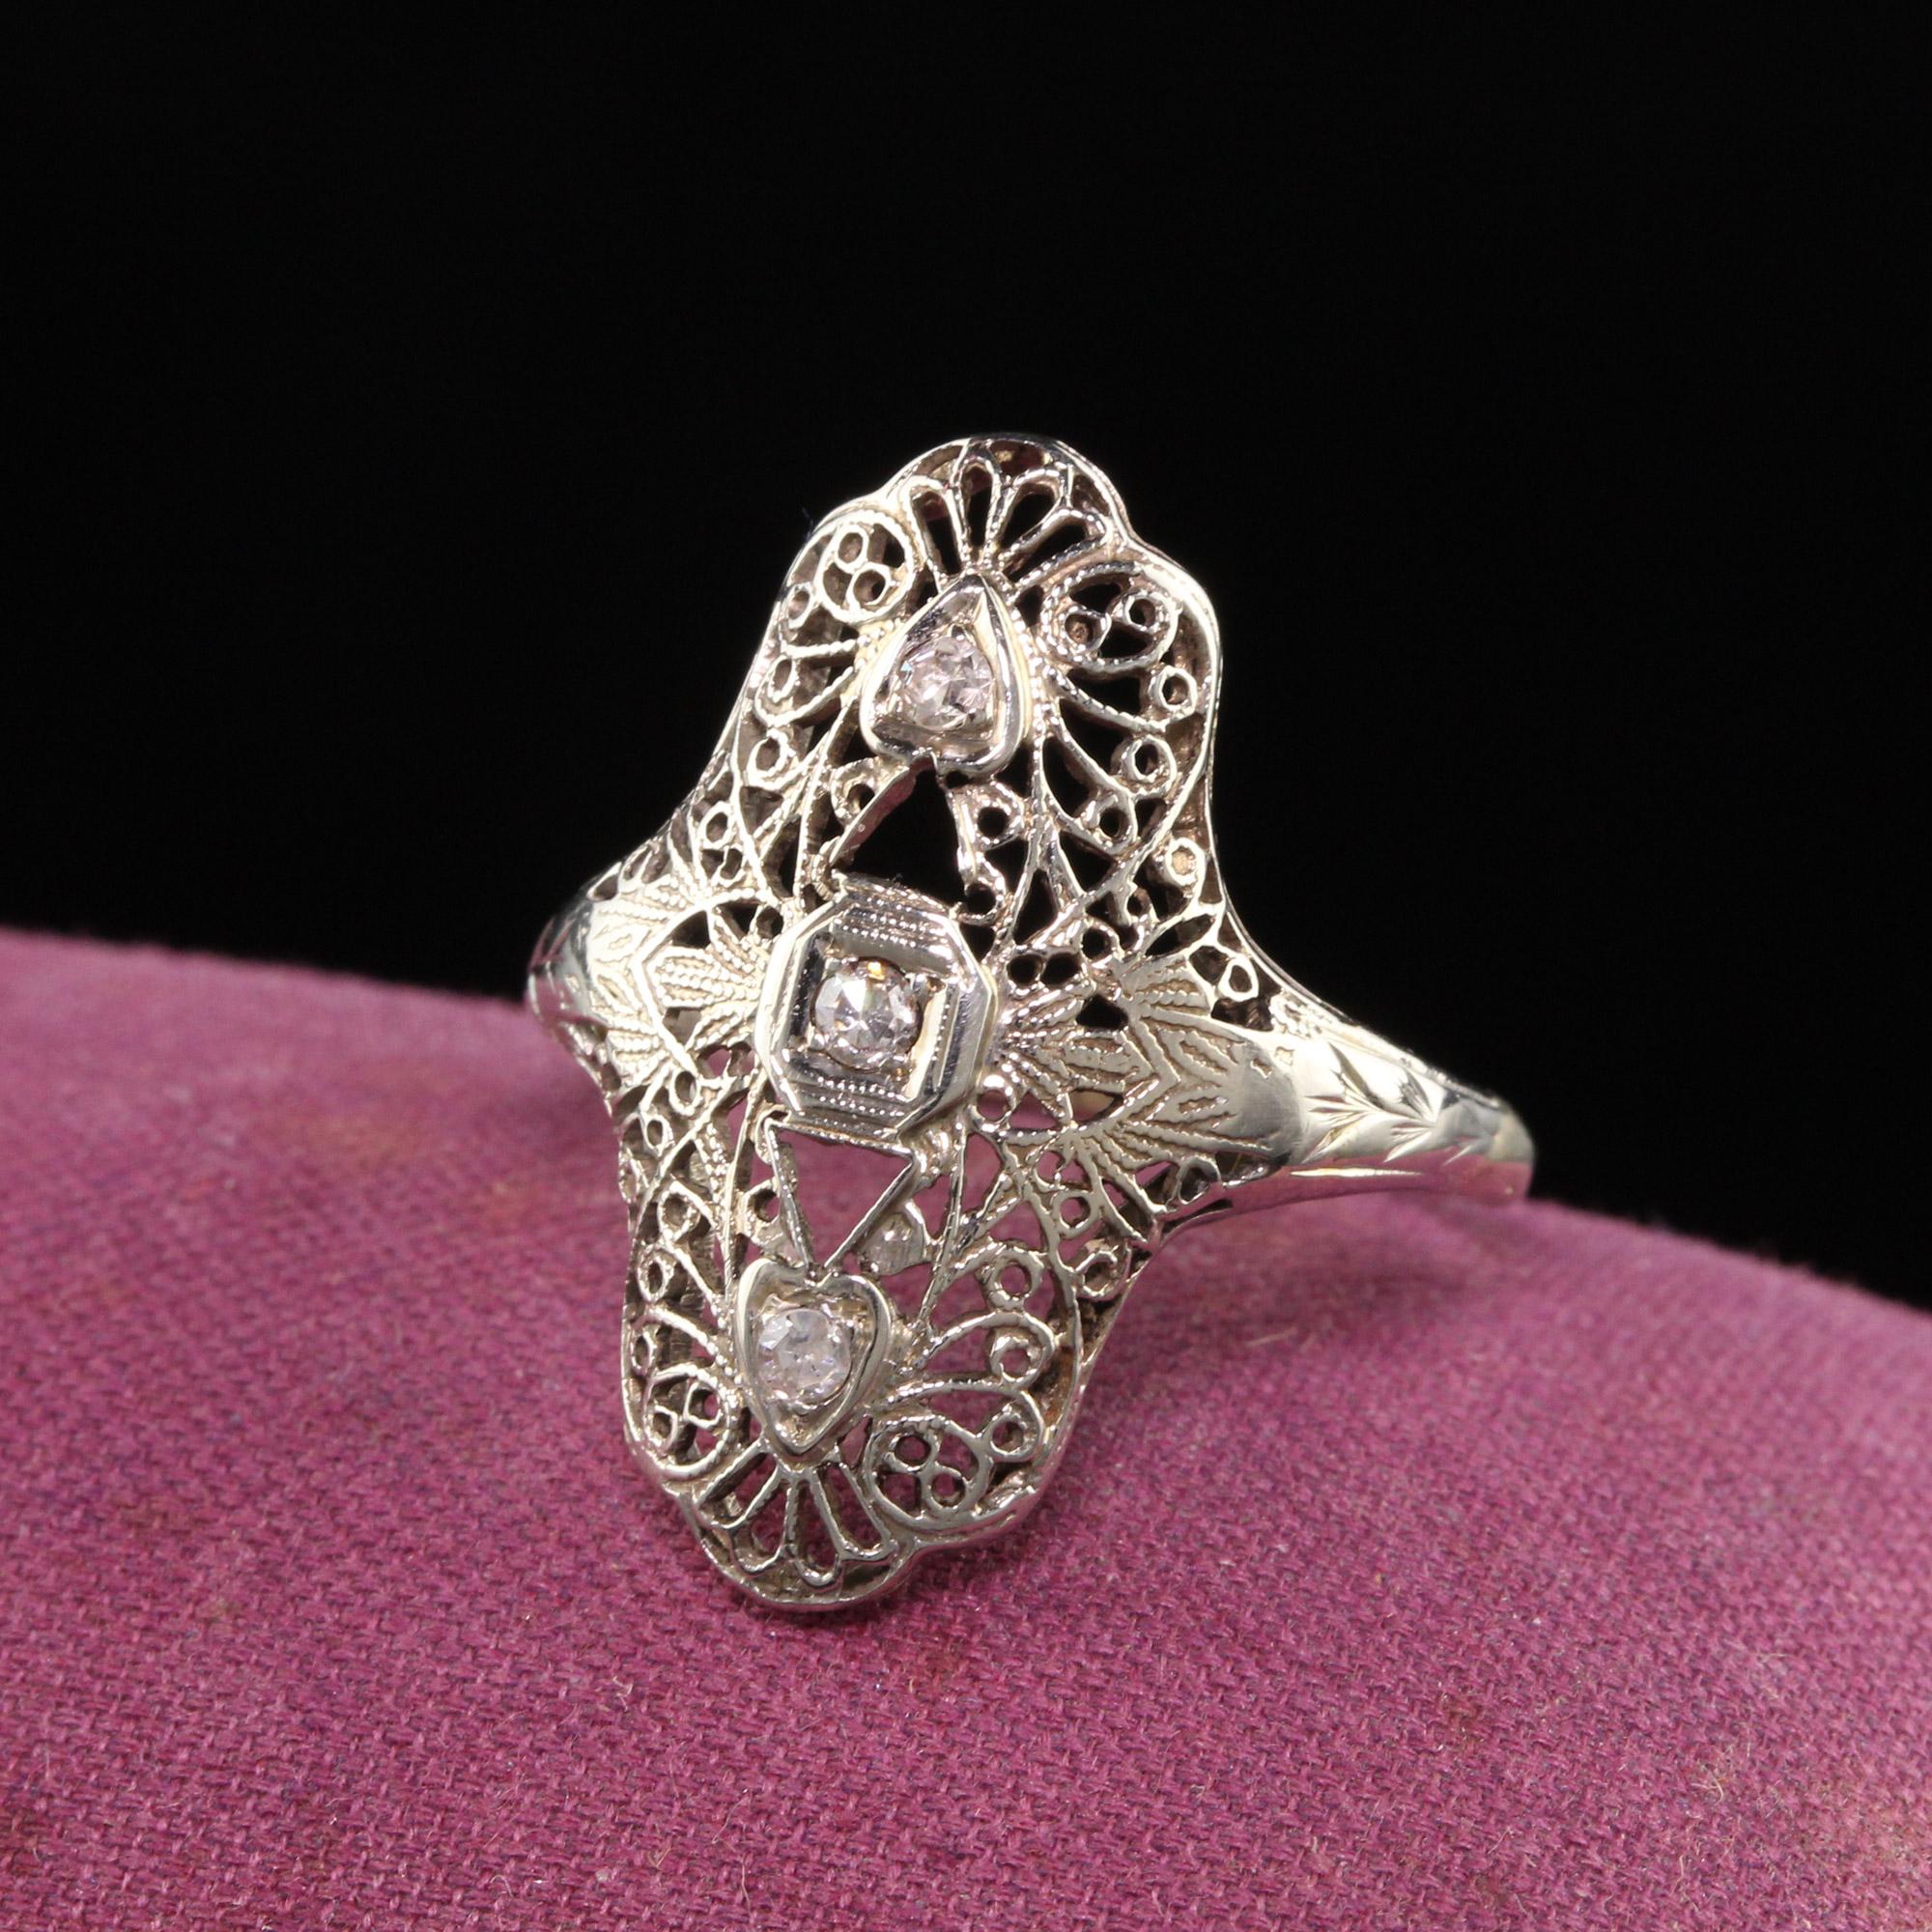 Beautiful Antique Art Deco 18K White Gold Diamond and Filigree Shield Ring. This gorgeous filigree ring has 3 single cut diamonds on it with fine filigree work all over it.

Item #R0980

Metal: 18K White Gold

Weight: 3.4 Grams

Diamonds: